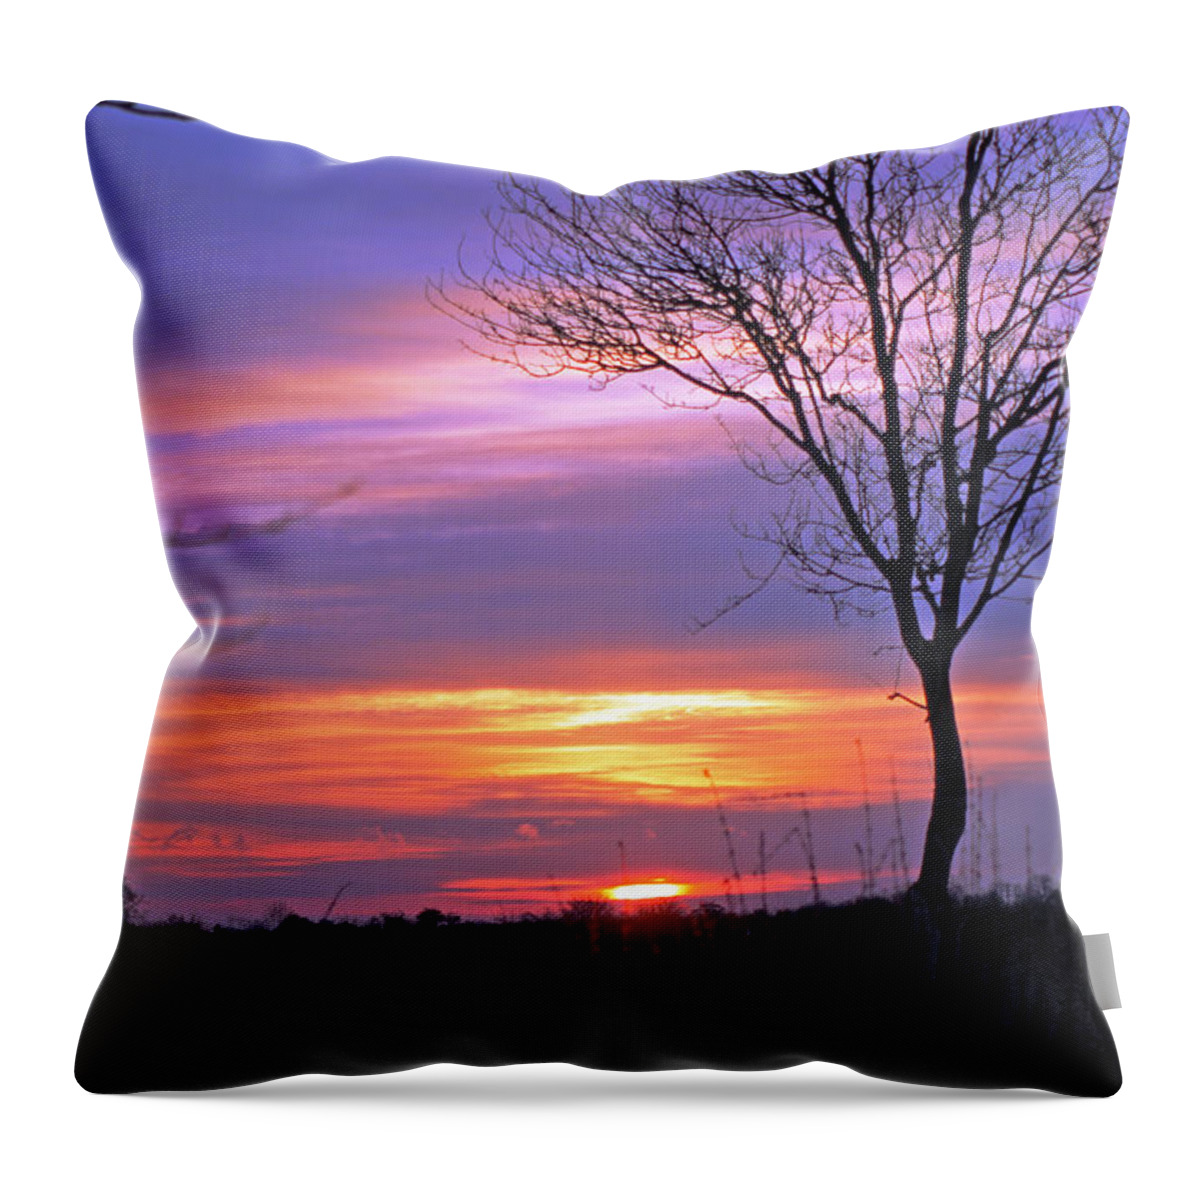 Sunset Throw Pillow featuring the photograph Sunset by Tony Murtagh